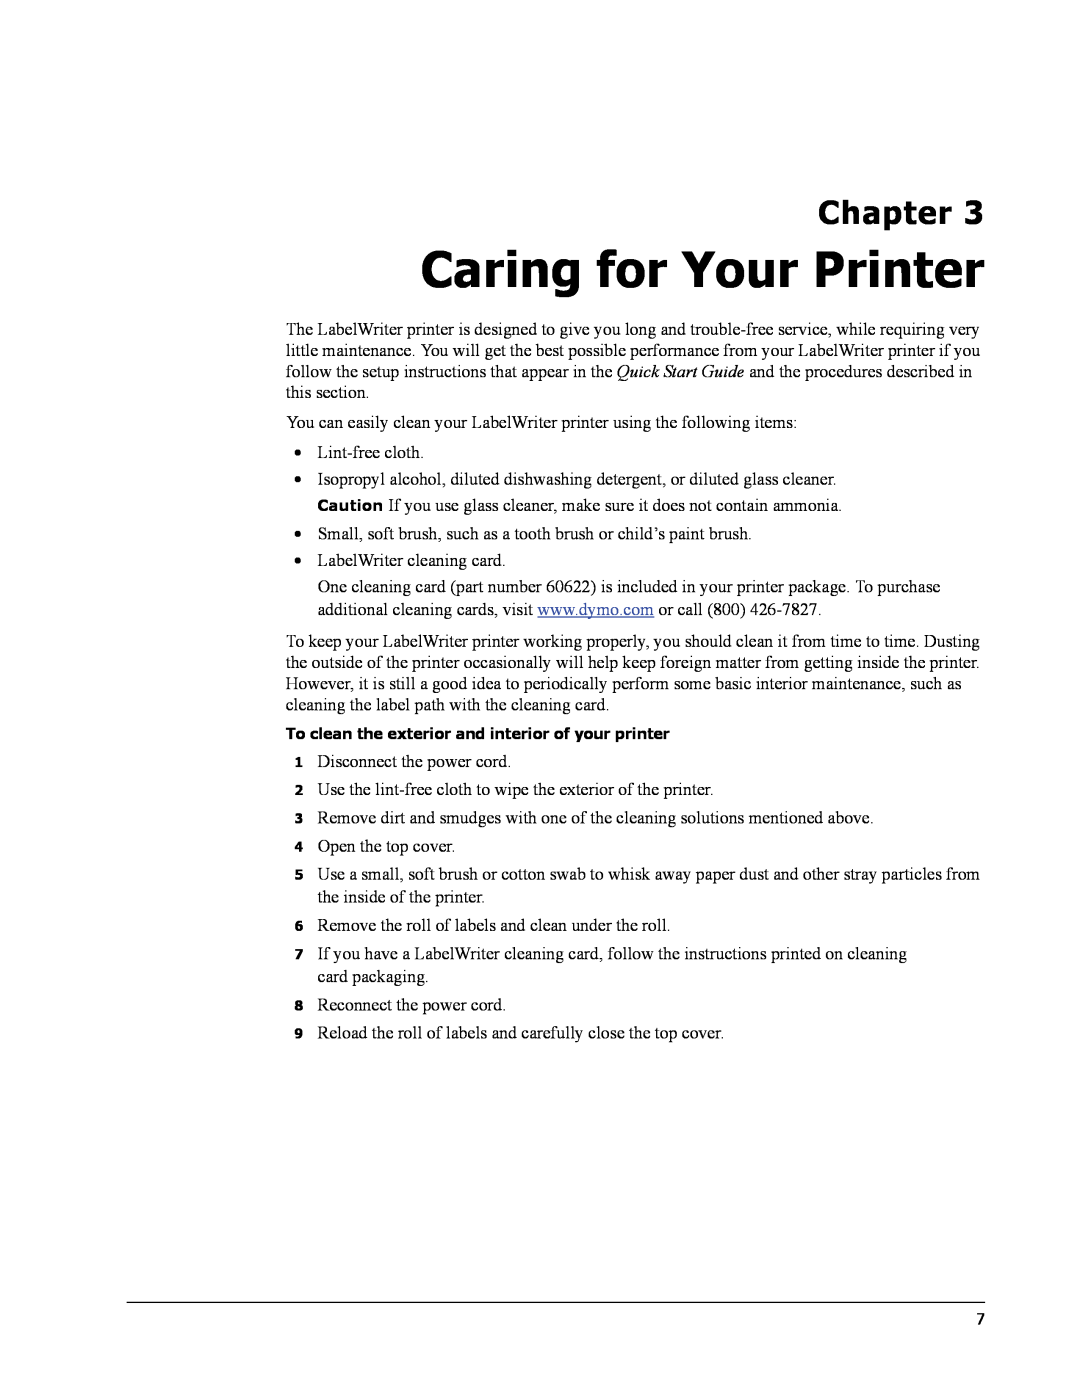 Dymo 4XL manual Caring for Your Printer, Chapter 